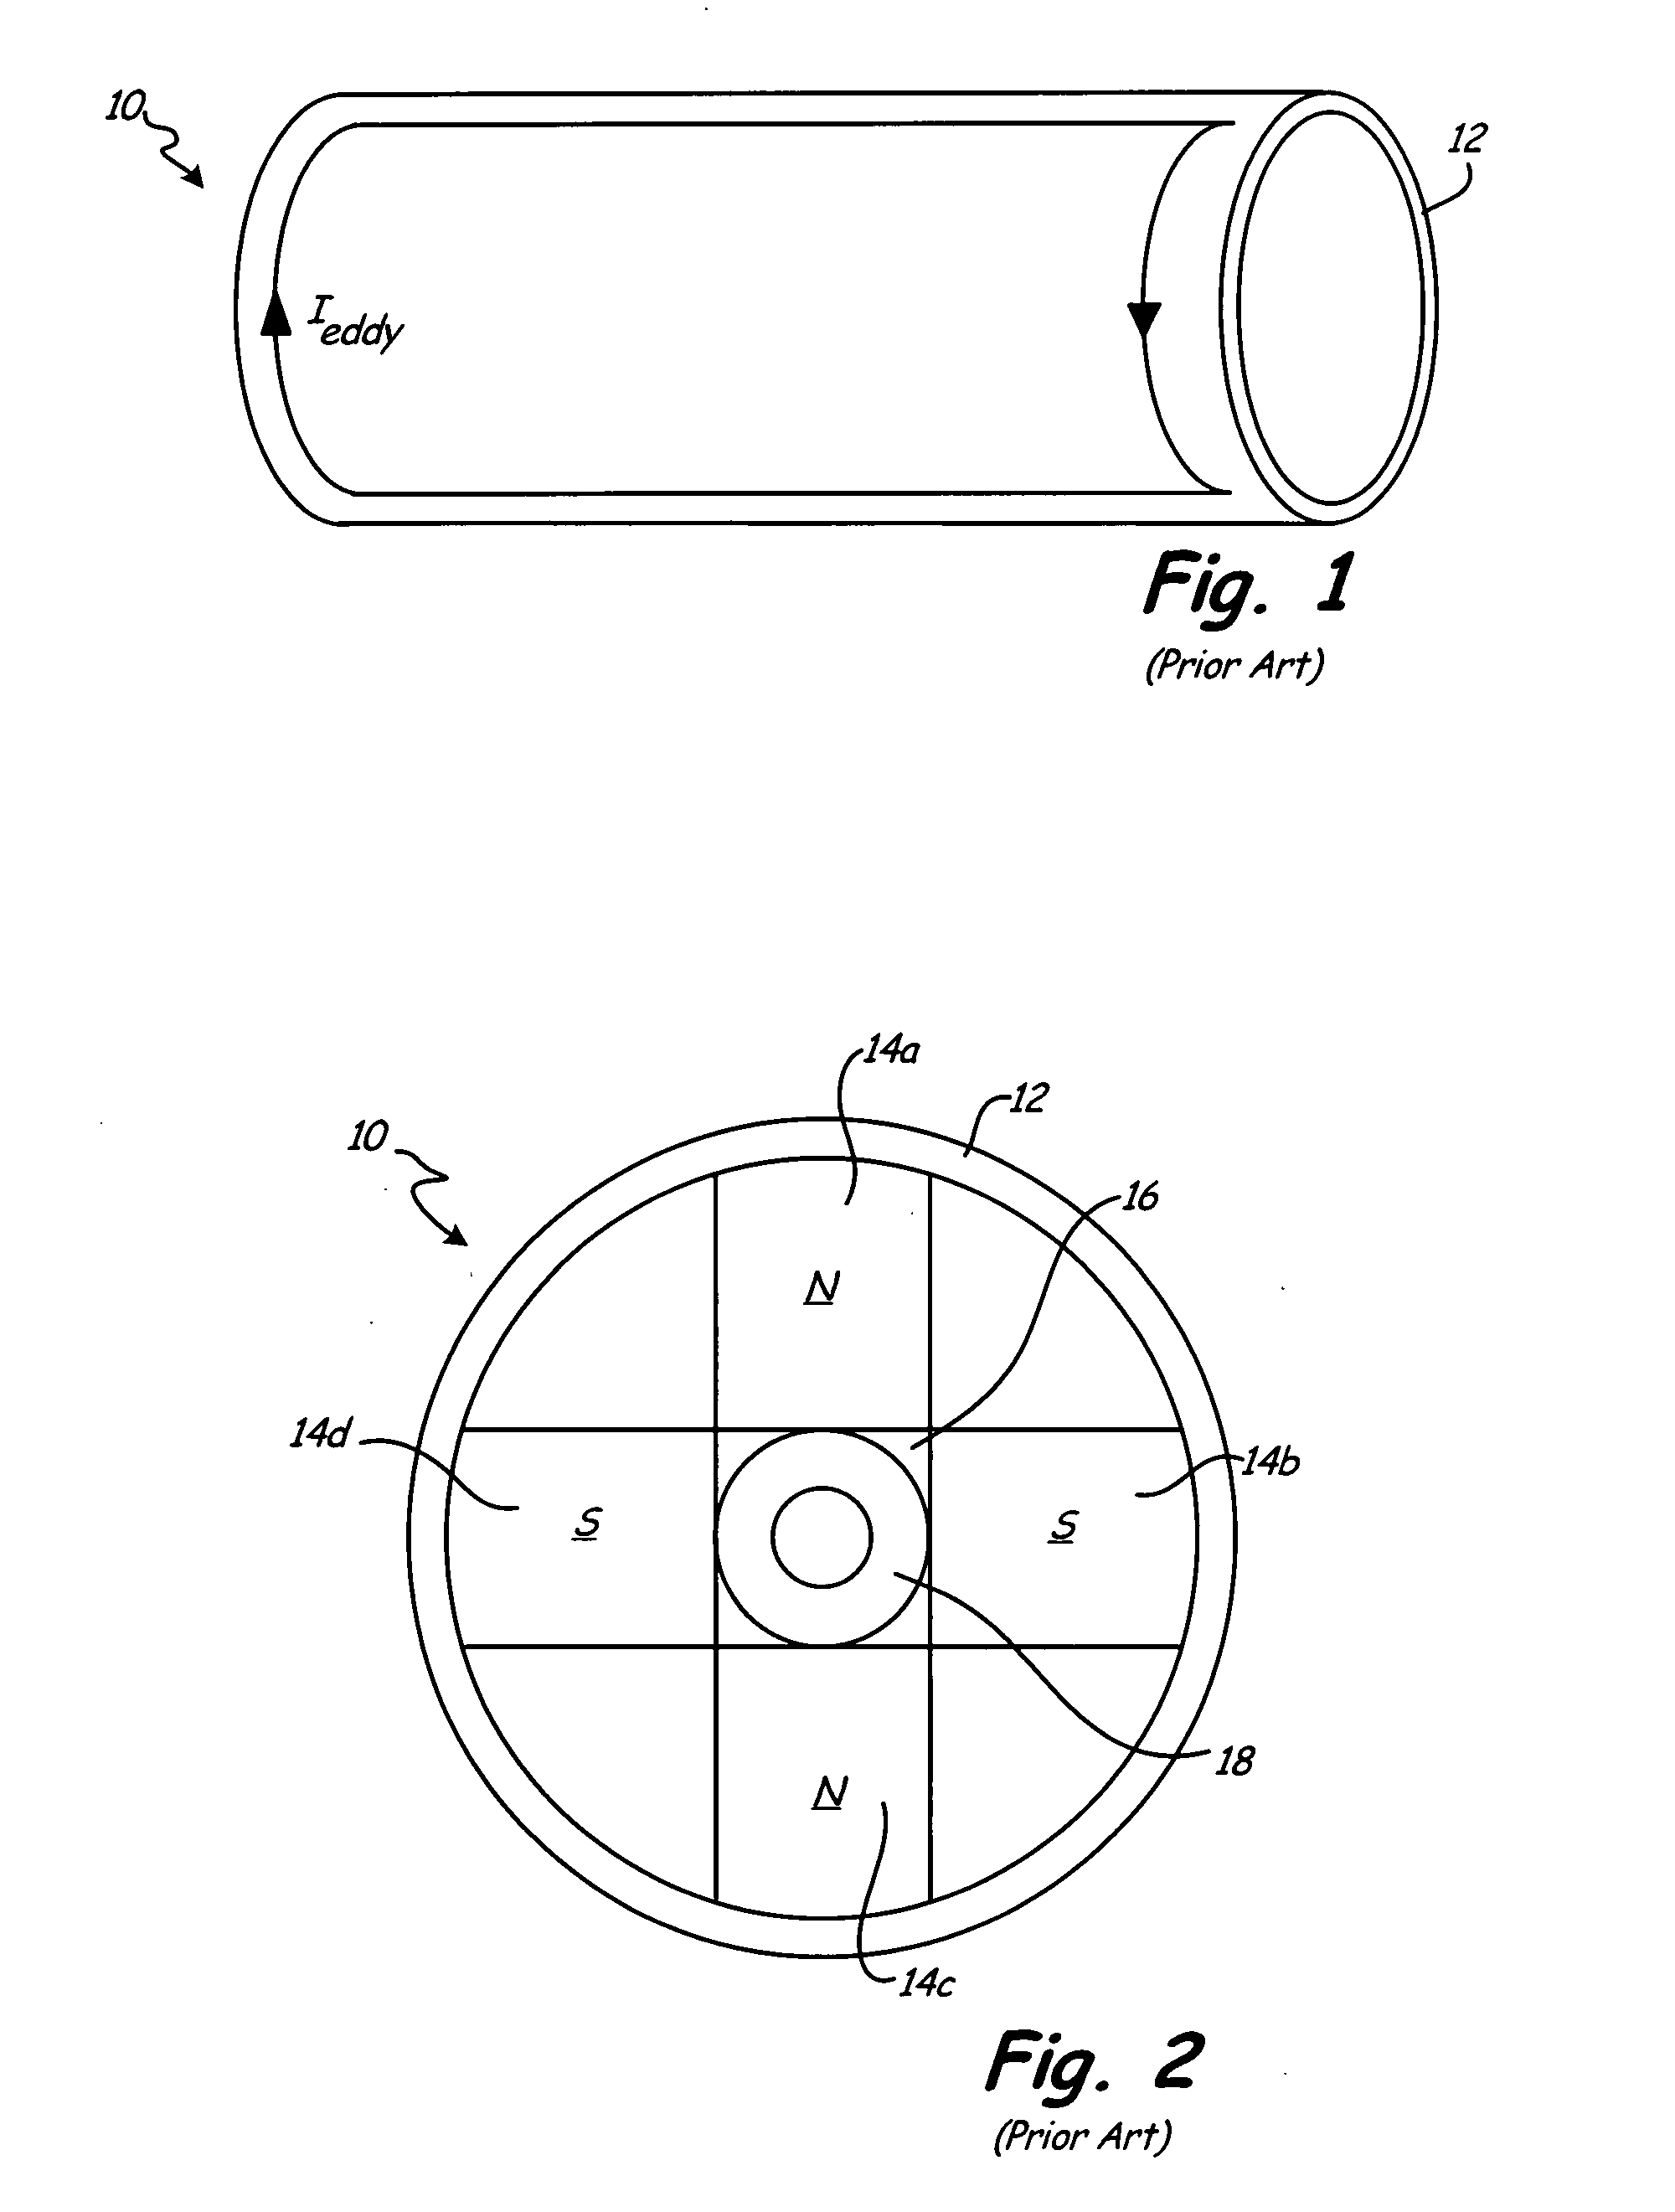 Segmented permanent magnet rotor for high speed synchronous machines